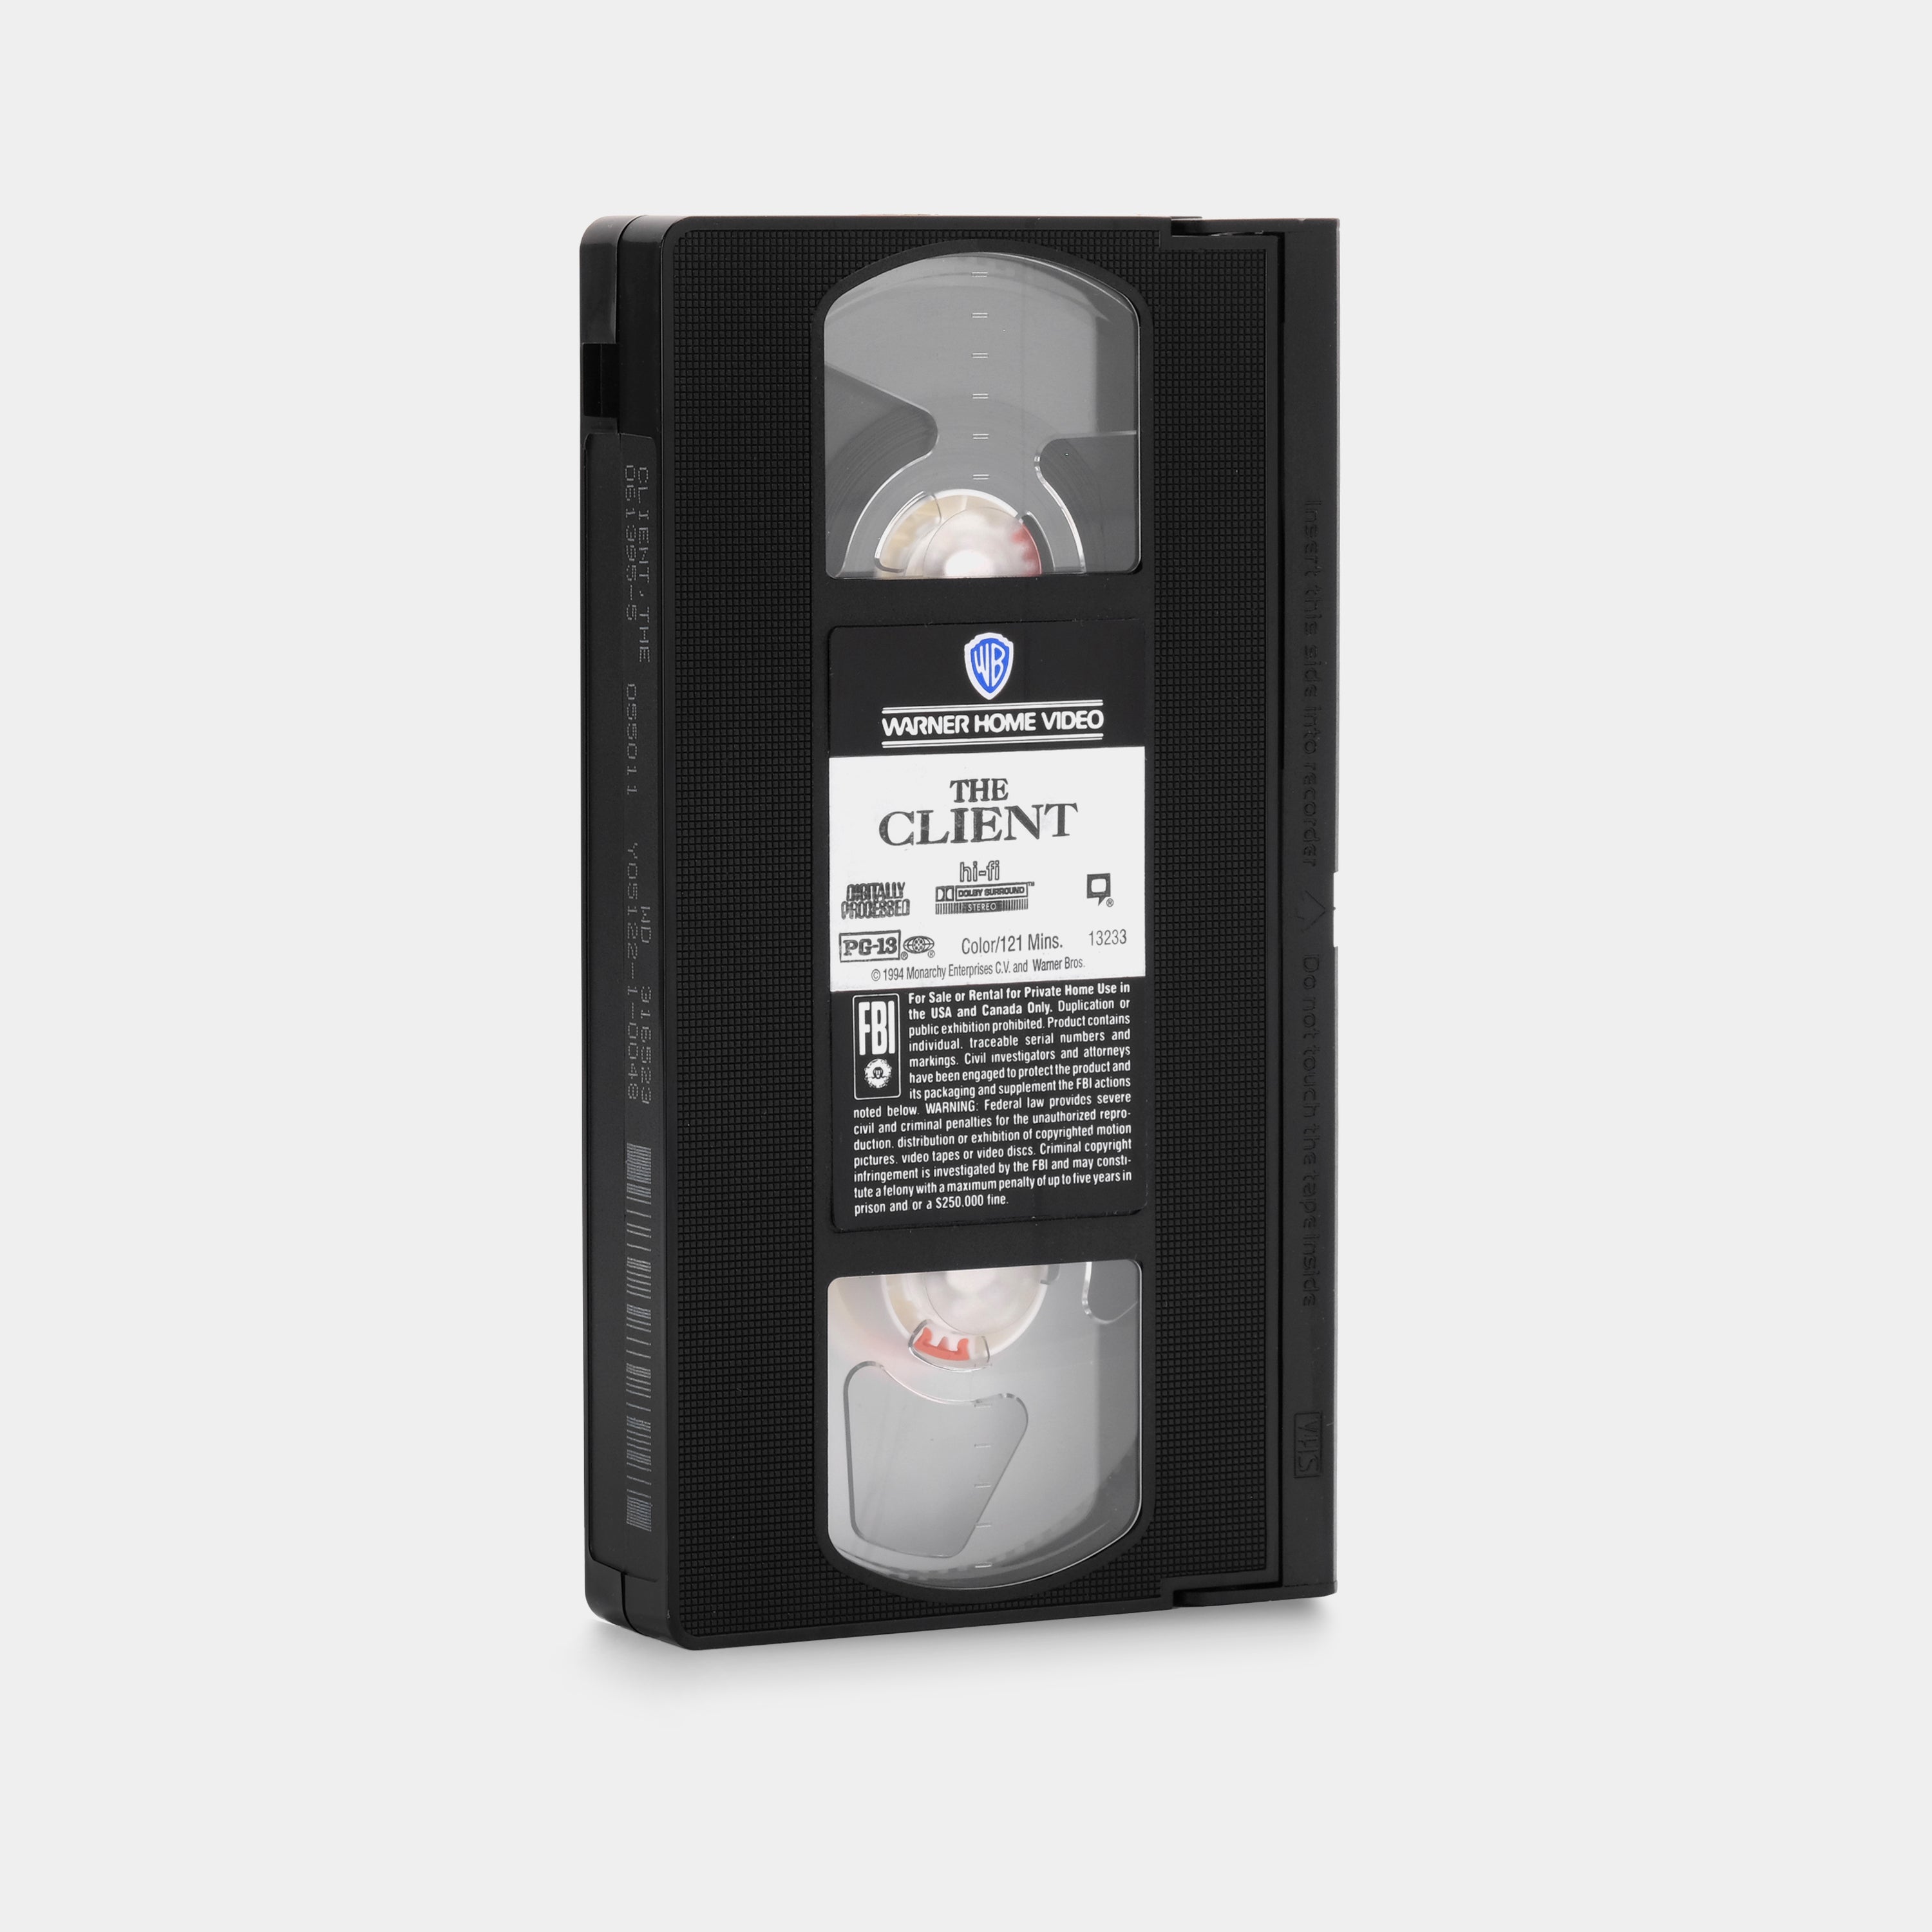 The Client VHS Tape